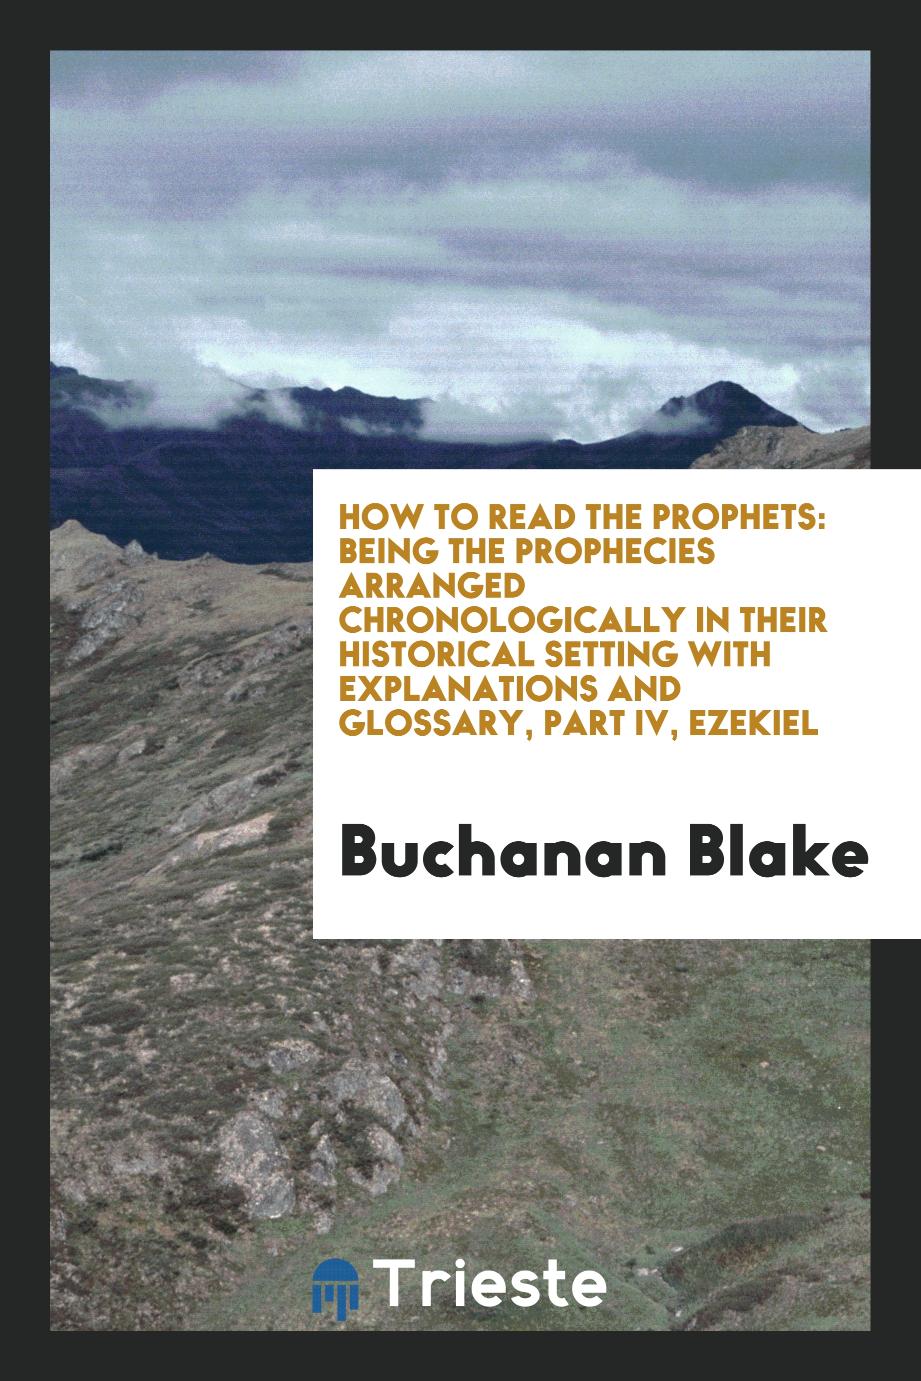 How to Read the Prophets: Being the Prophecies Arranged Chronologically in Their Historical Setting with Explanations and Glossary, Part IV, Ezekiel